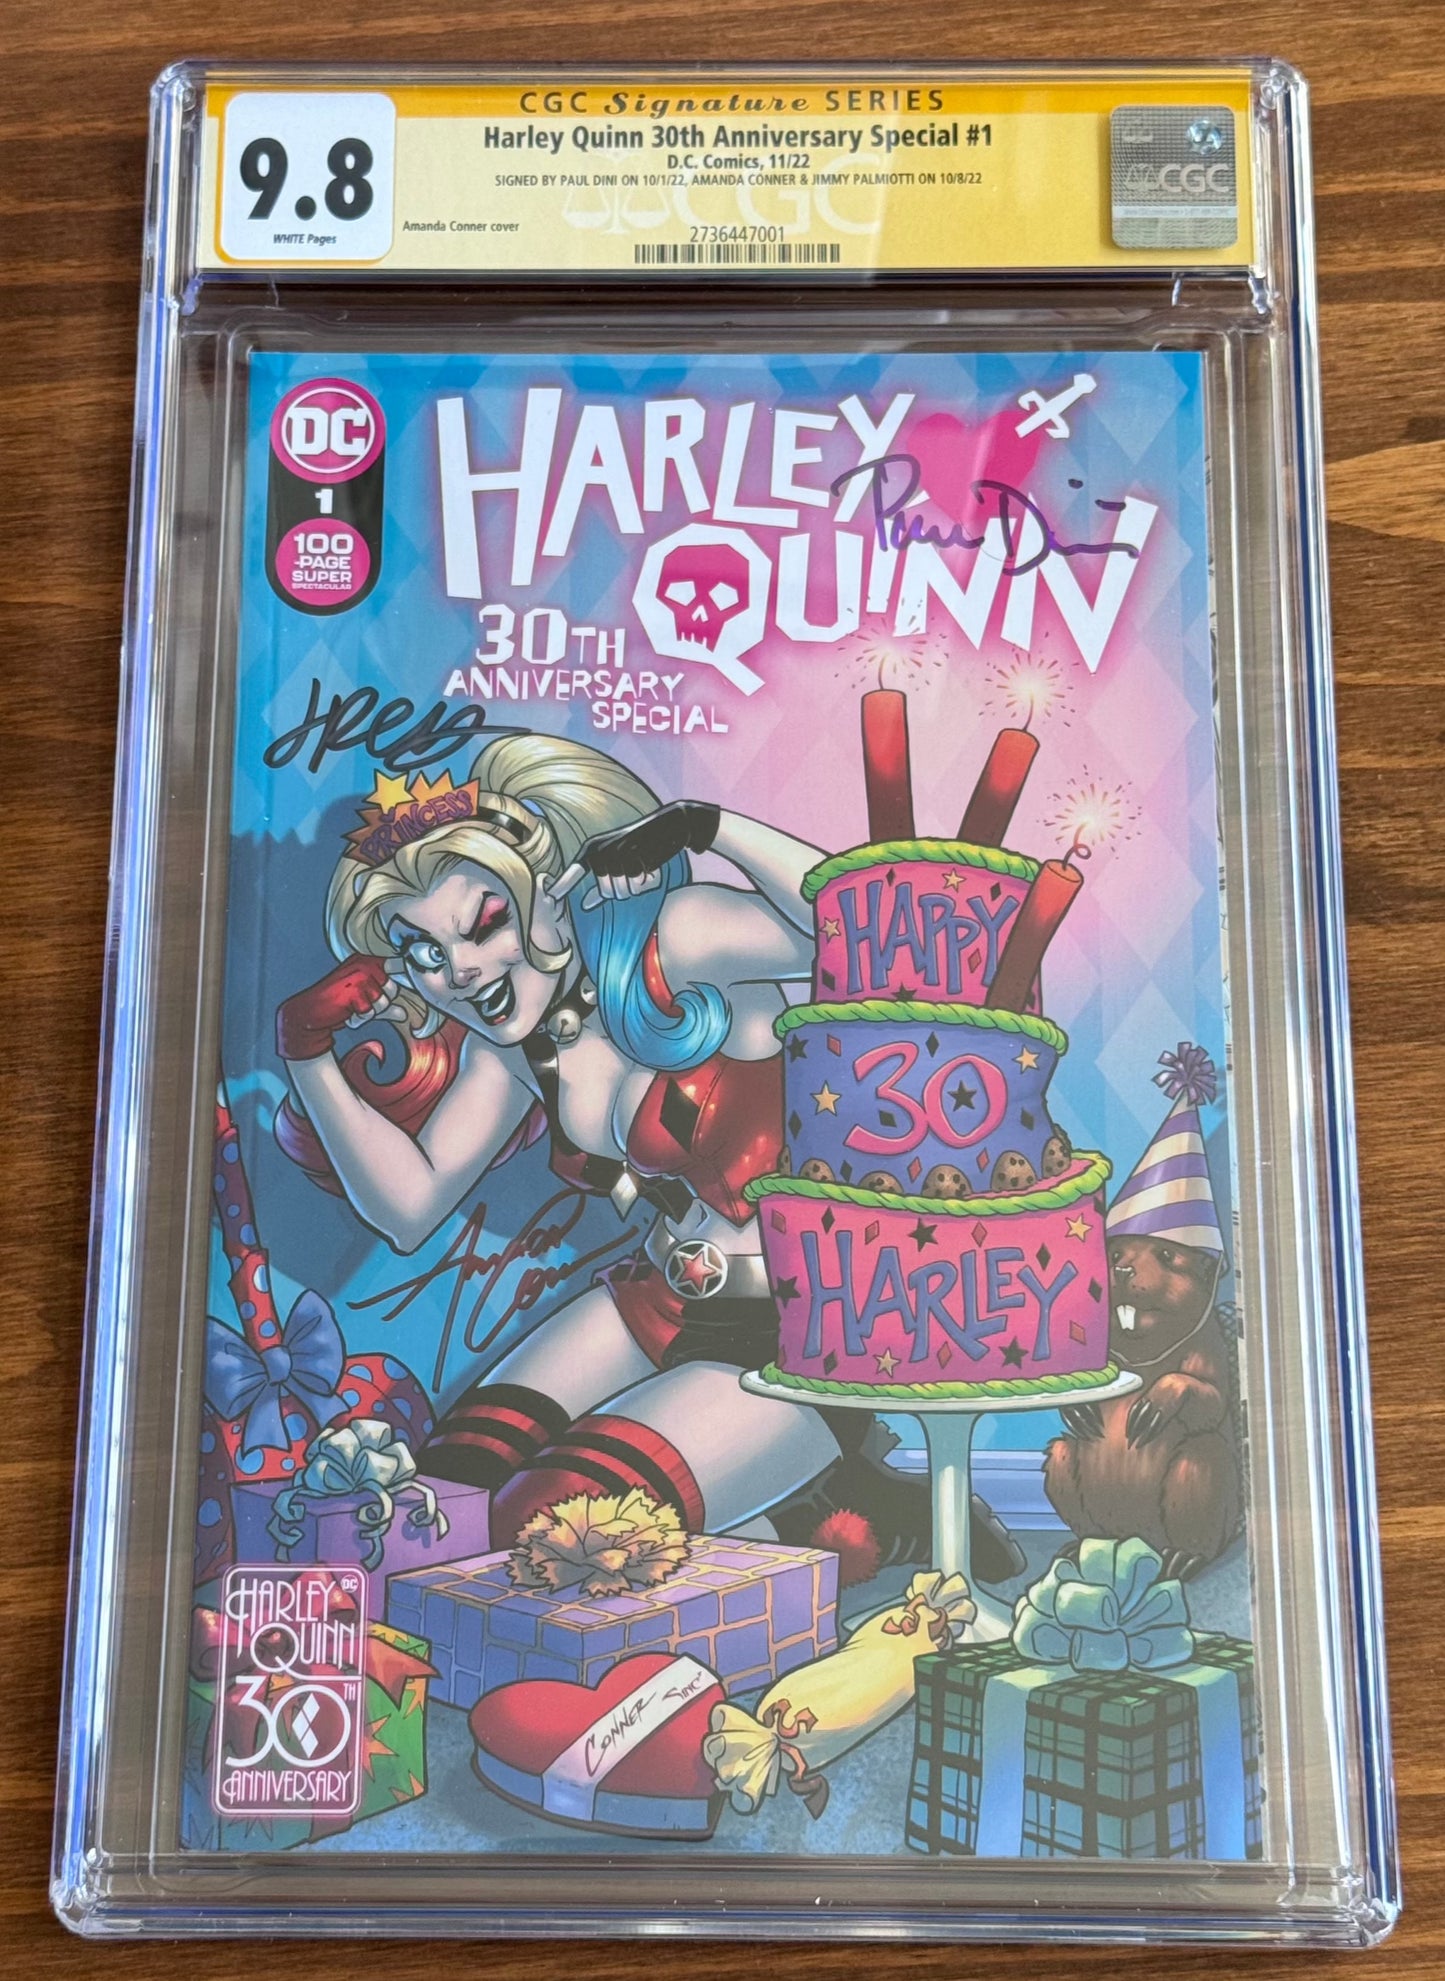 Harley Quinn 30th Anniversary Special #1 Paul Dini- SIGNED CGC SS